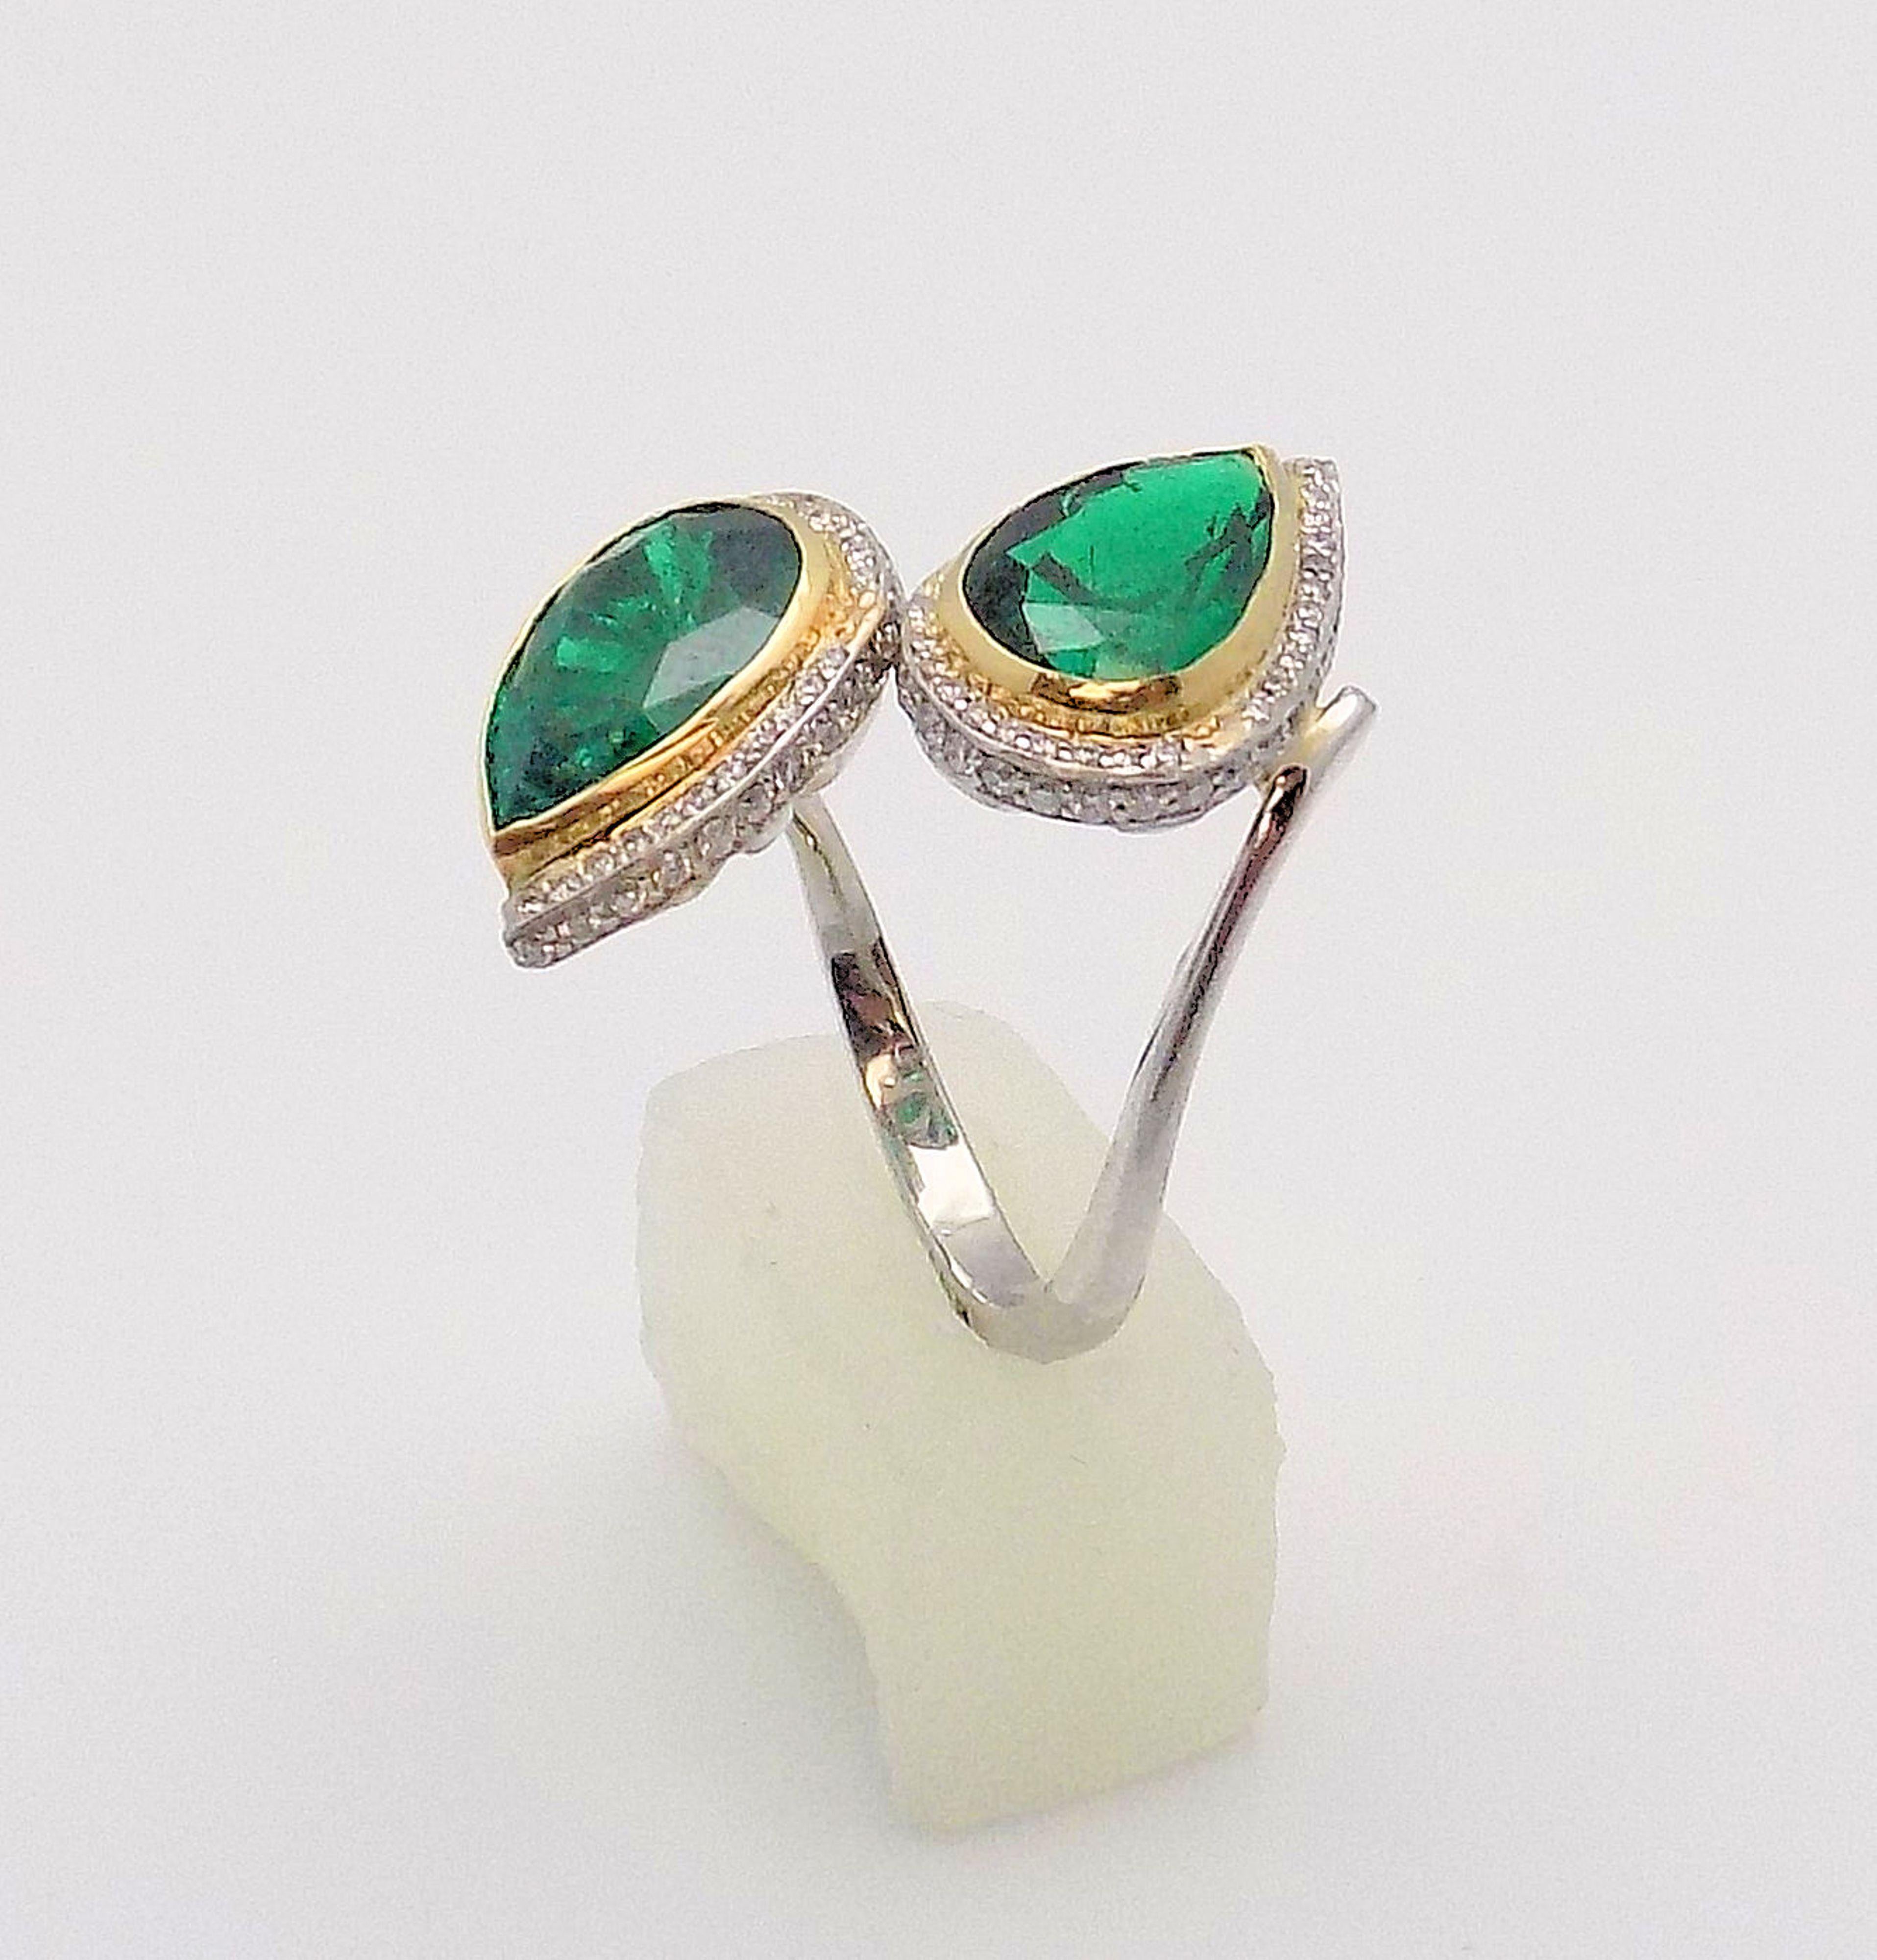 Dramatic Platinum and 18 karat Yellow Gold Ring of Matching Pear Shaped Emeralds Surrounded by Diamonds. Emeralds 2.10 Carat and 2.13 Carat; 84 Round Brilliant Diamonds 0.25 Carat Total Weight, VS, H-I; Finger Size 6.5; 5.6 DWT or 8.71 Grams.